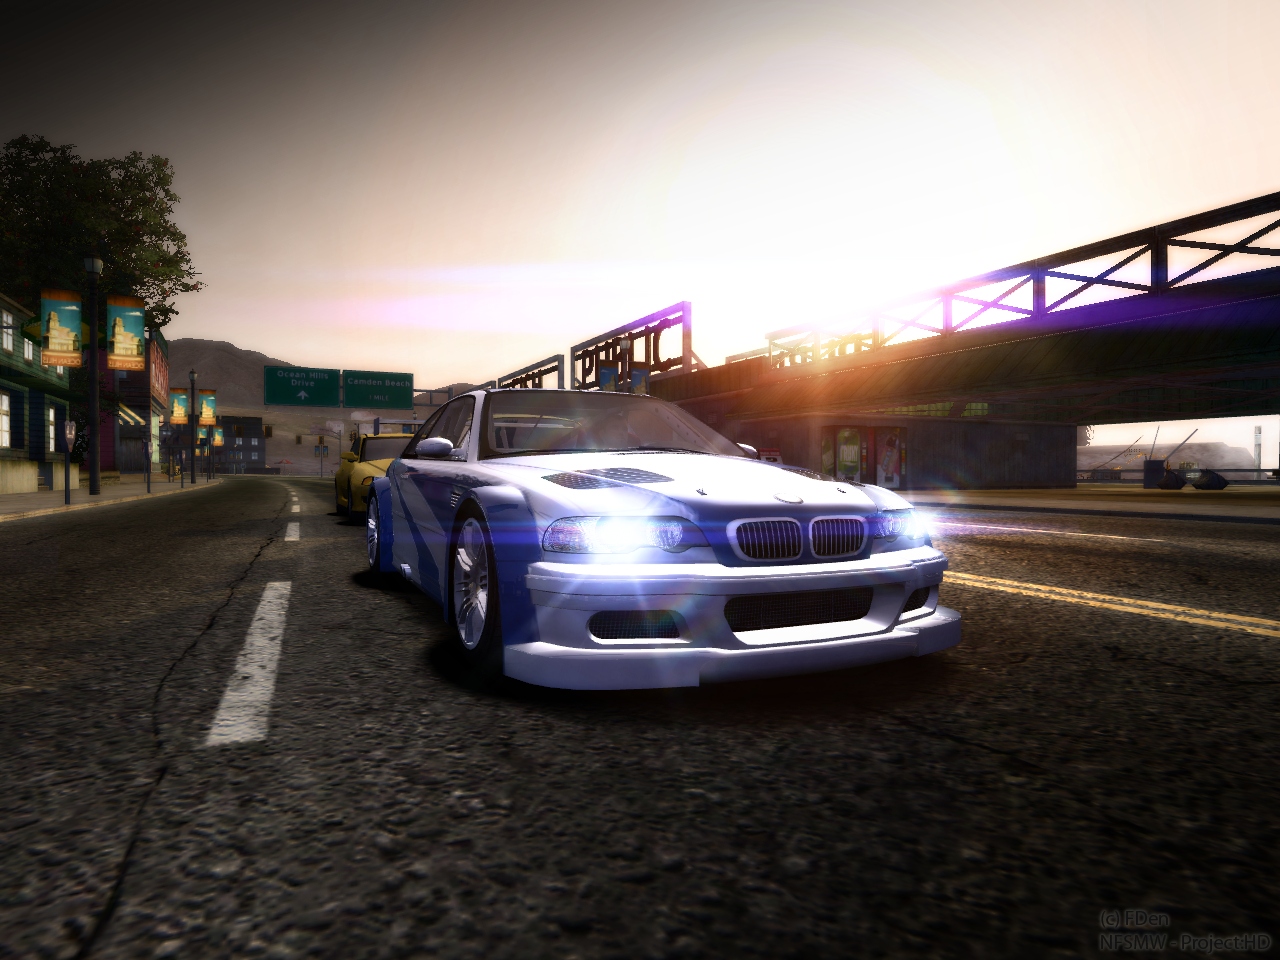 Nfs Most Wanted Pc Games Mods Download Full Version